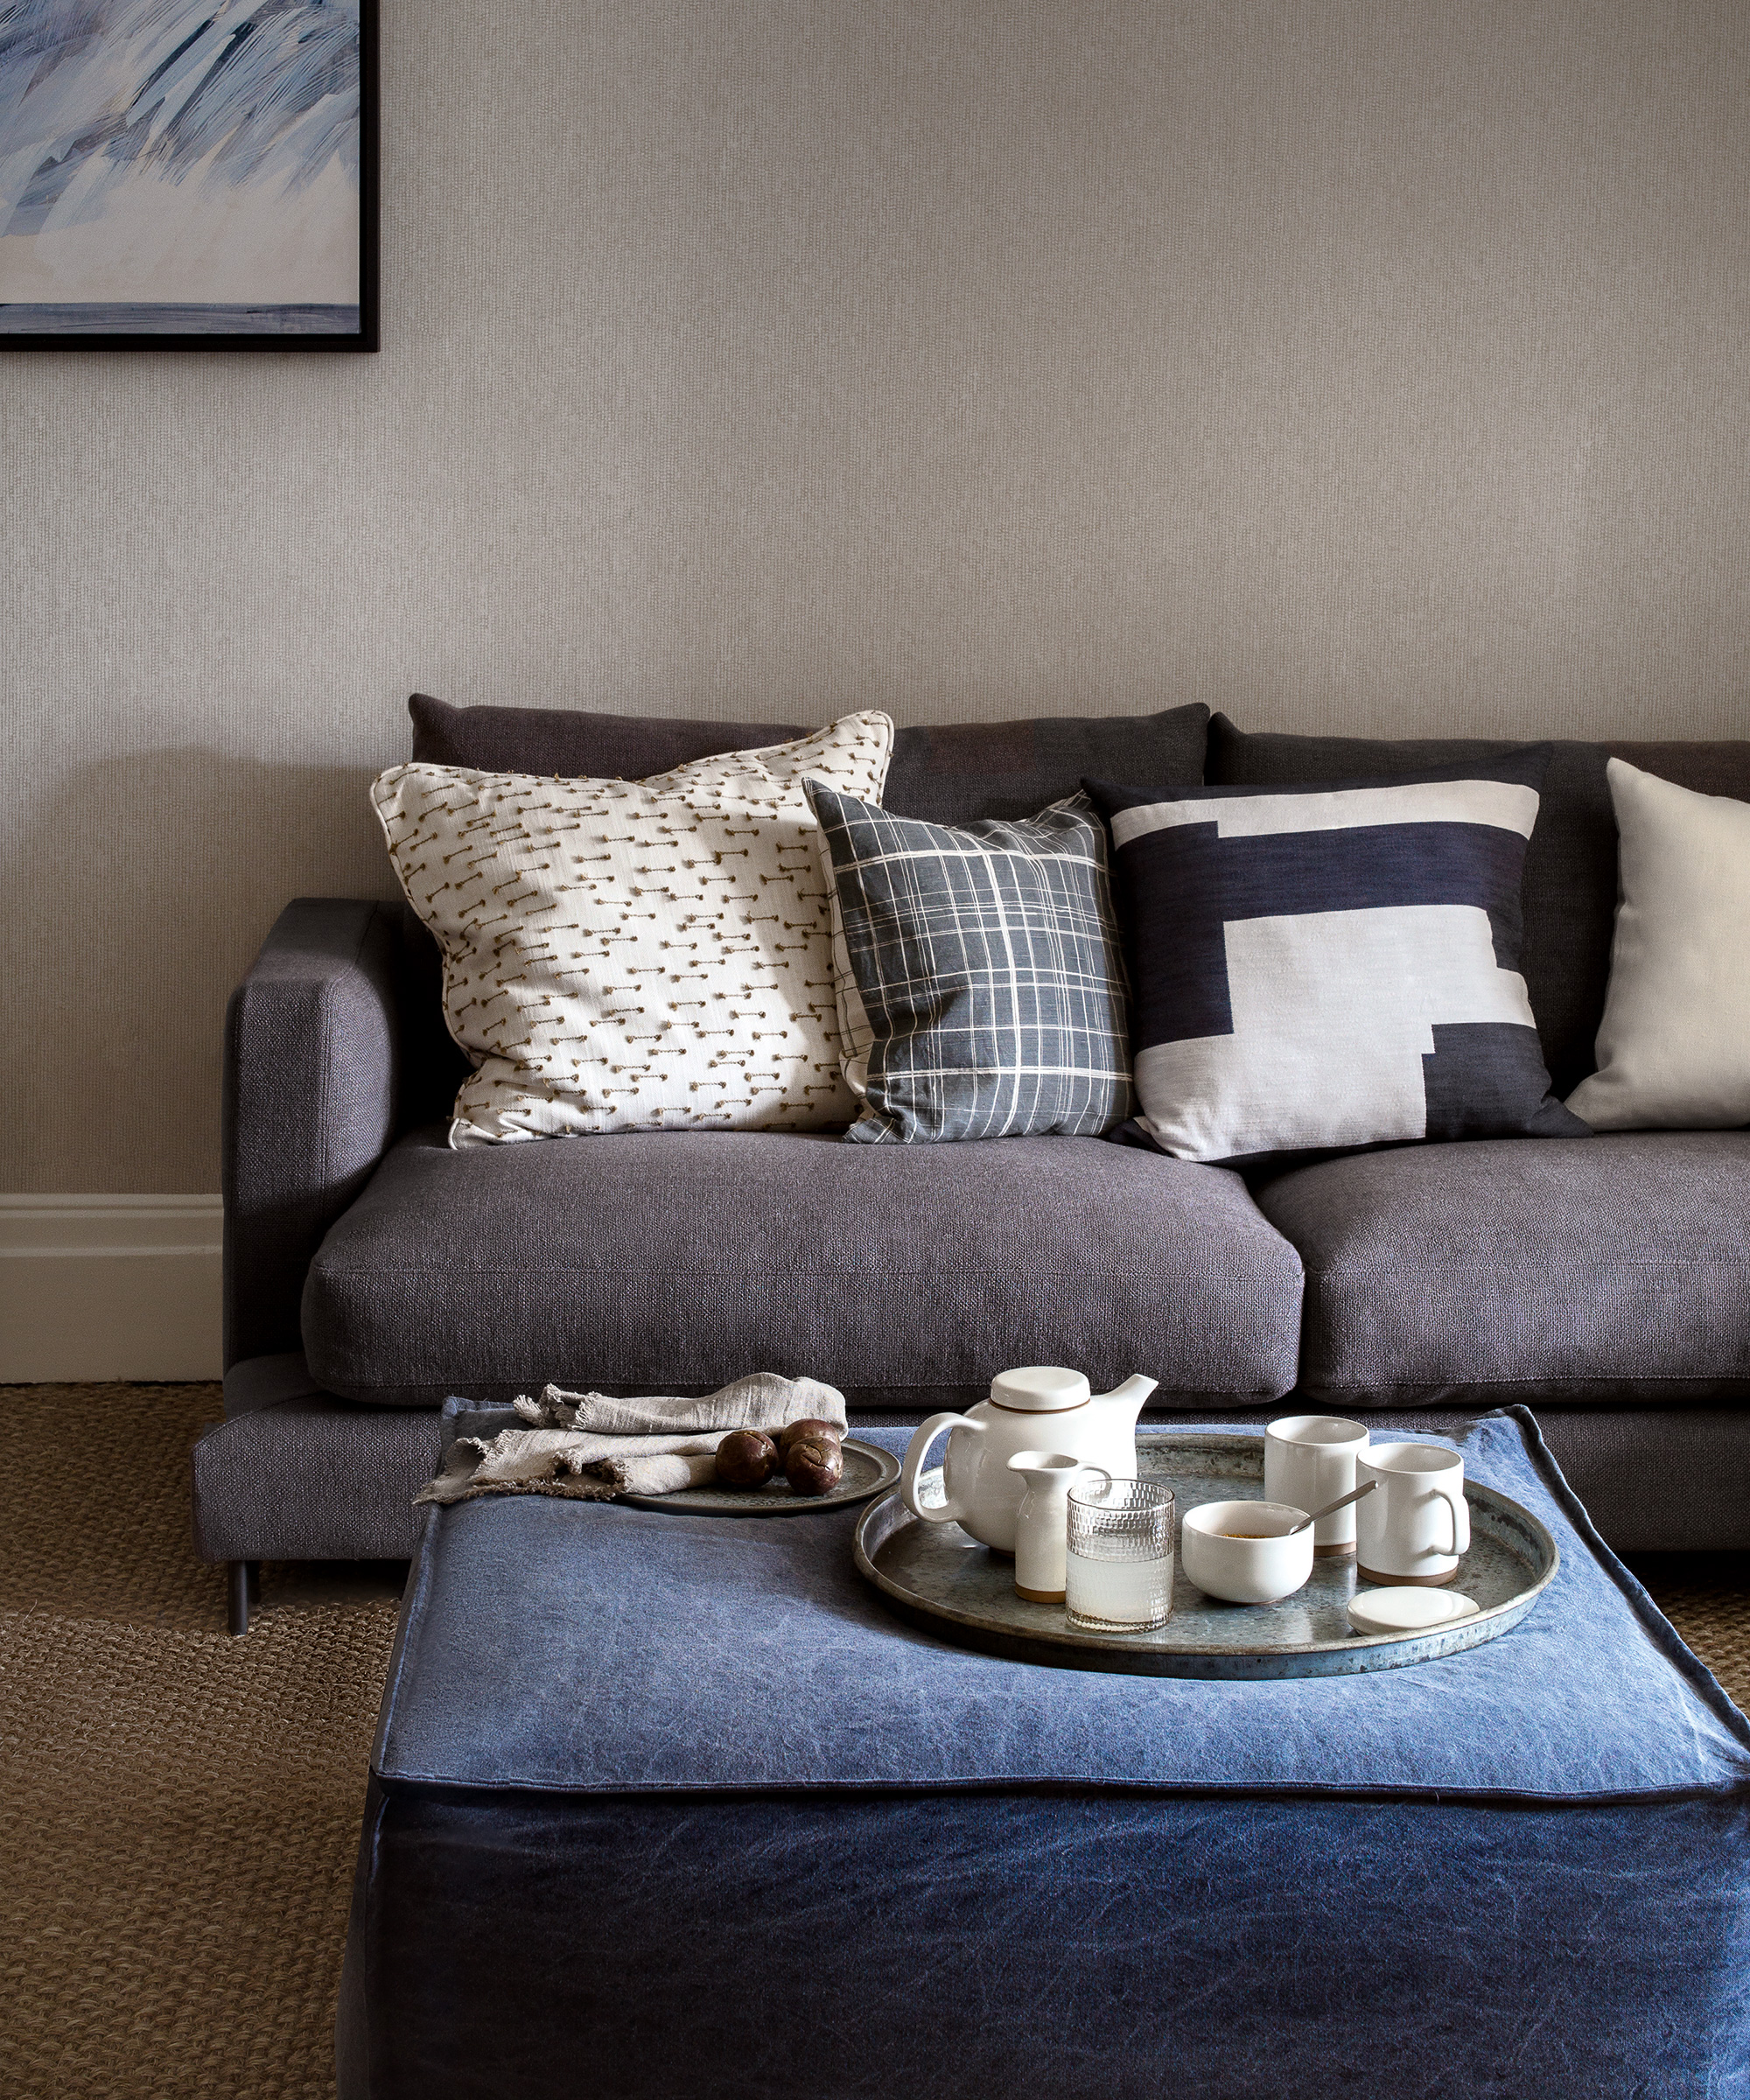 A pale beige living room with charcoal grey sofa and different grey shades in the cushions.